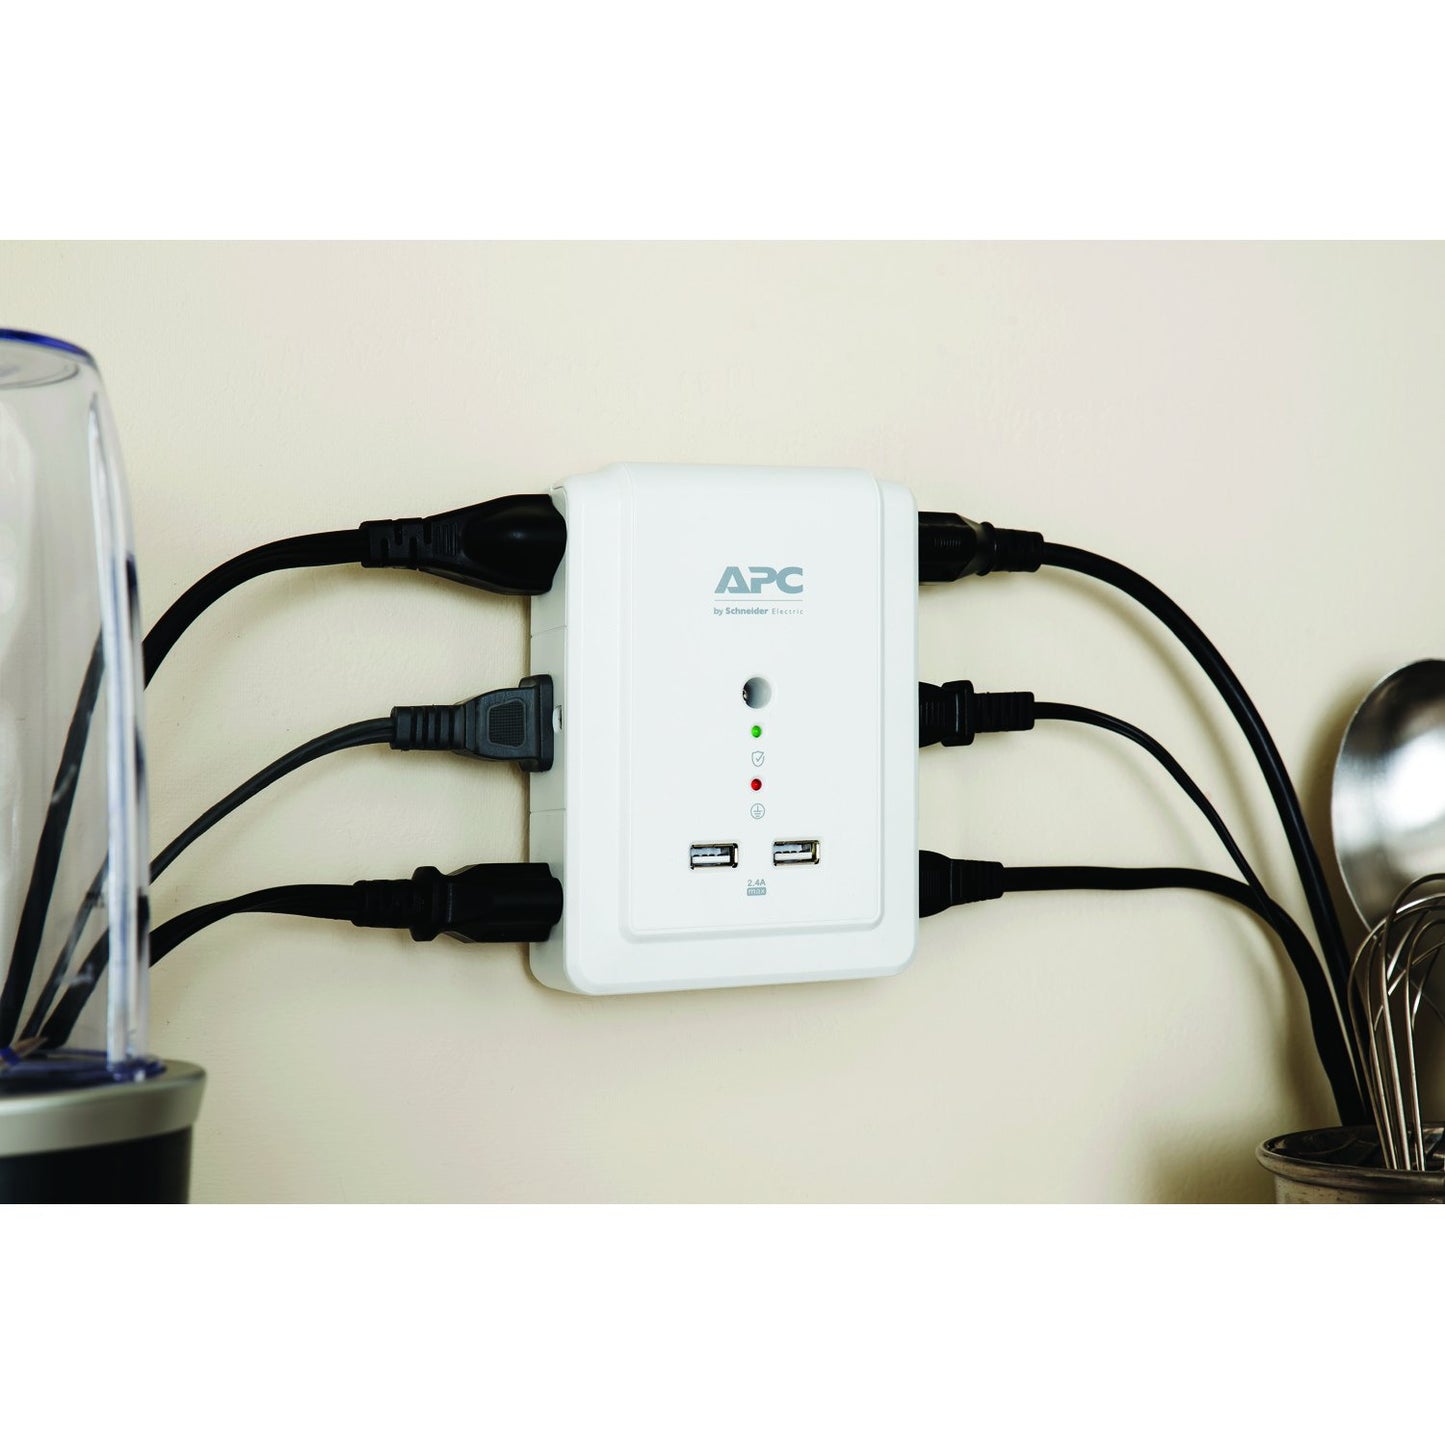 APC P6WU2 6-Outlet SurgeArrest® Surge Protector Wall Tap with 2 USB Ports